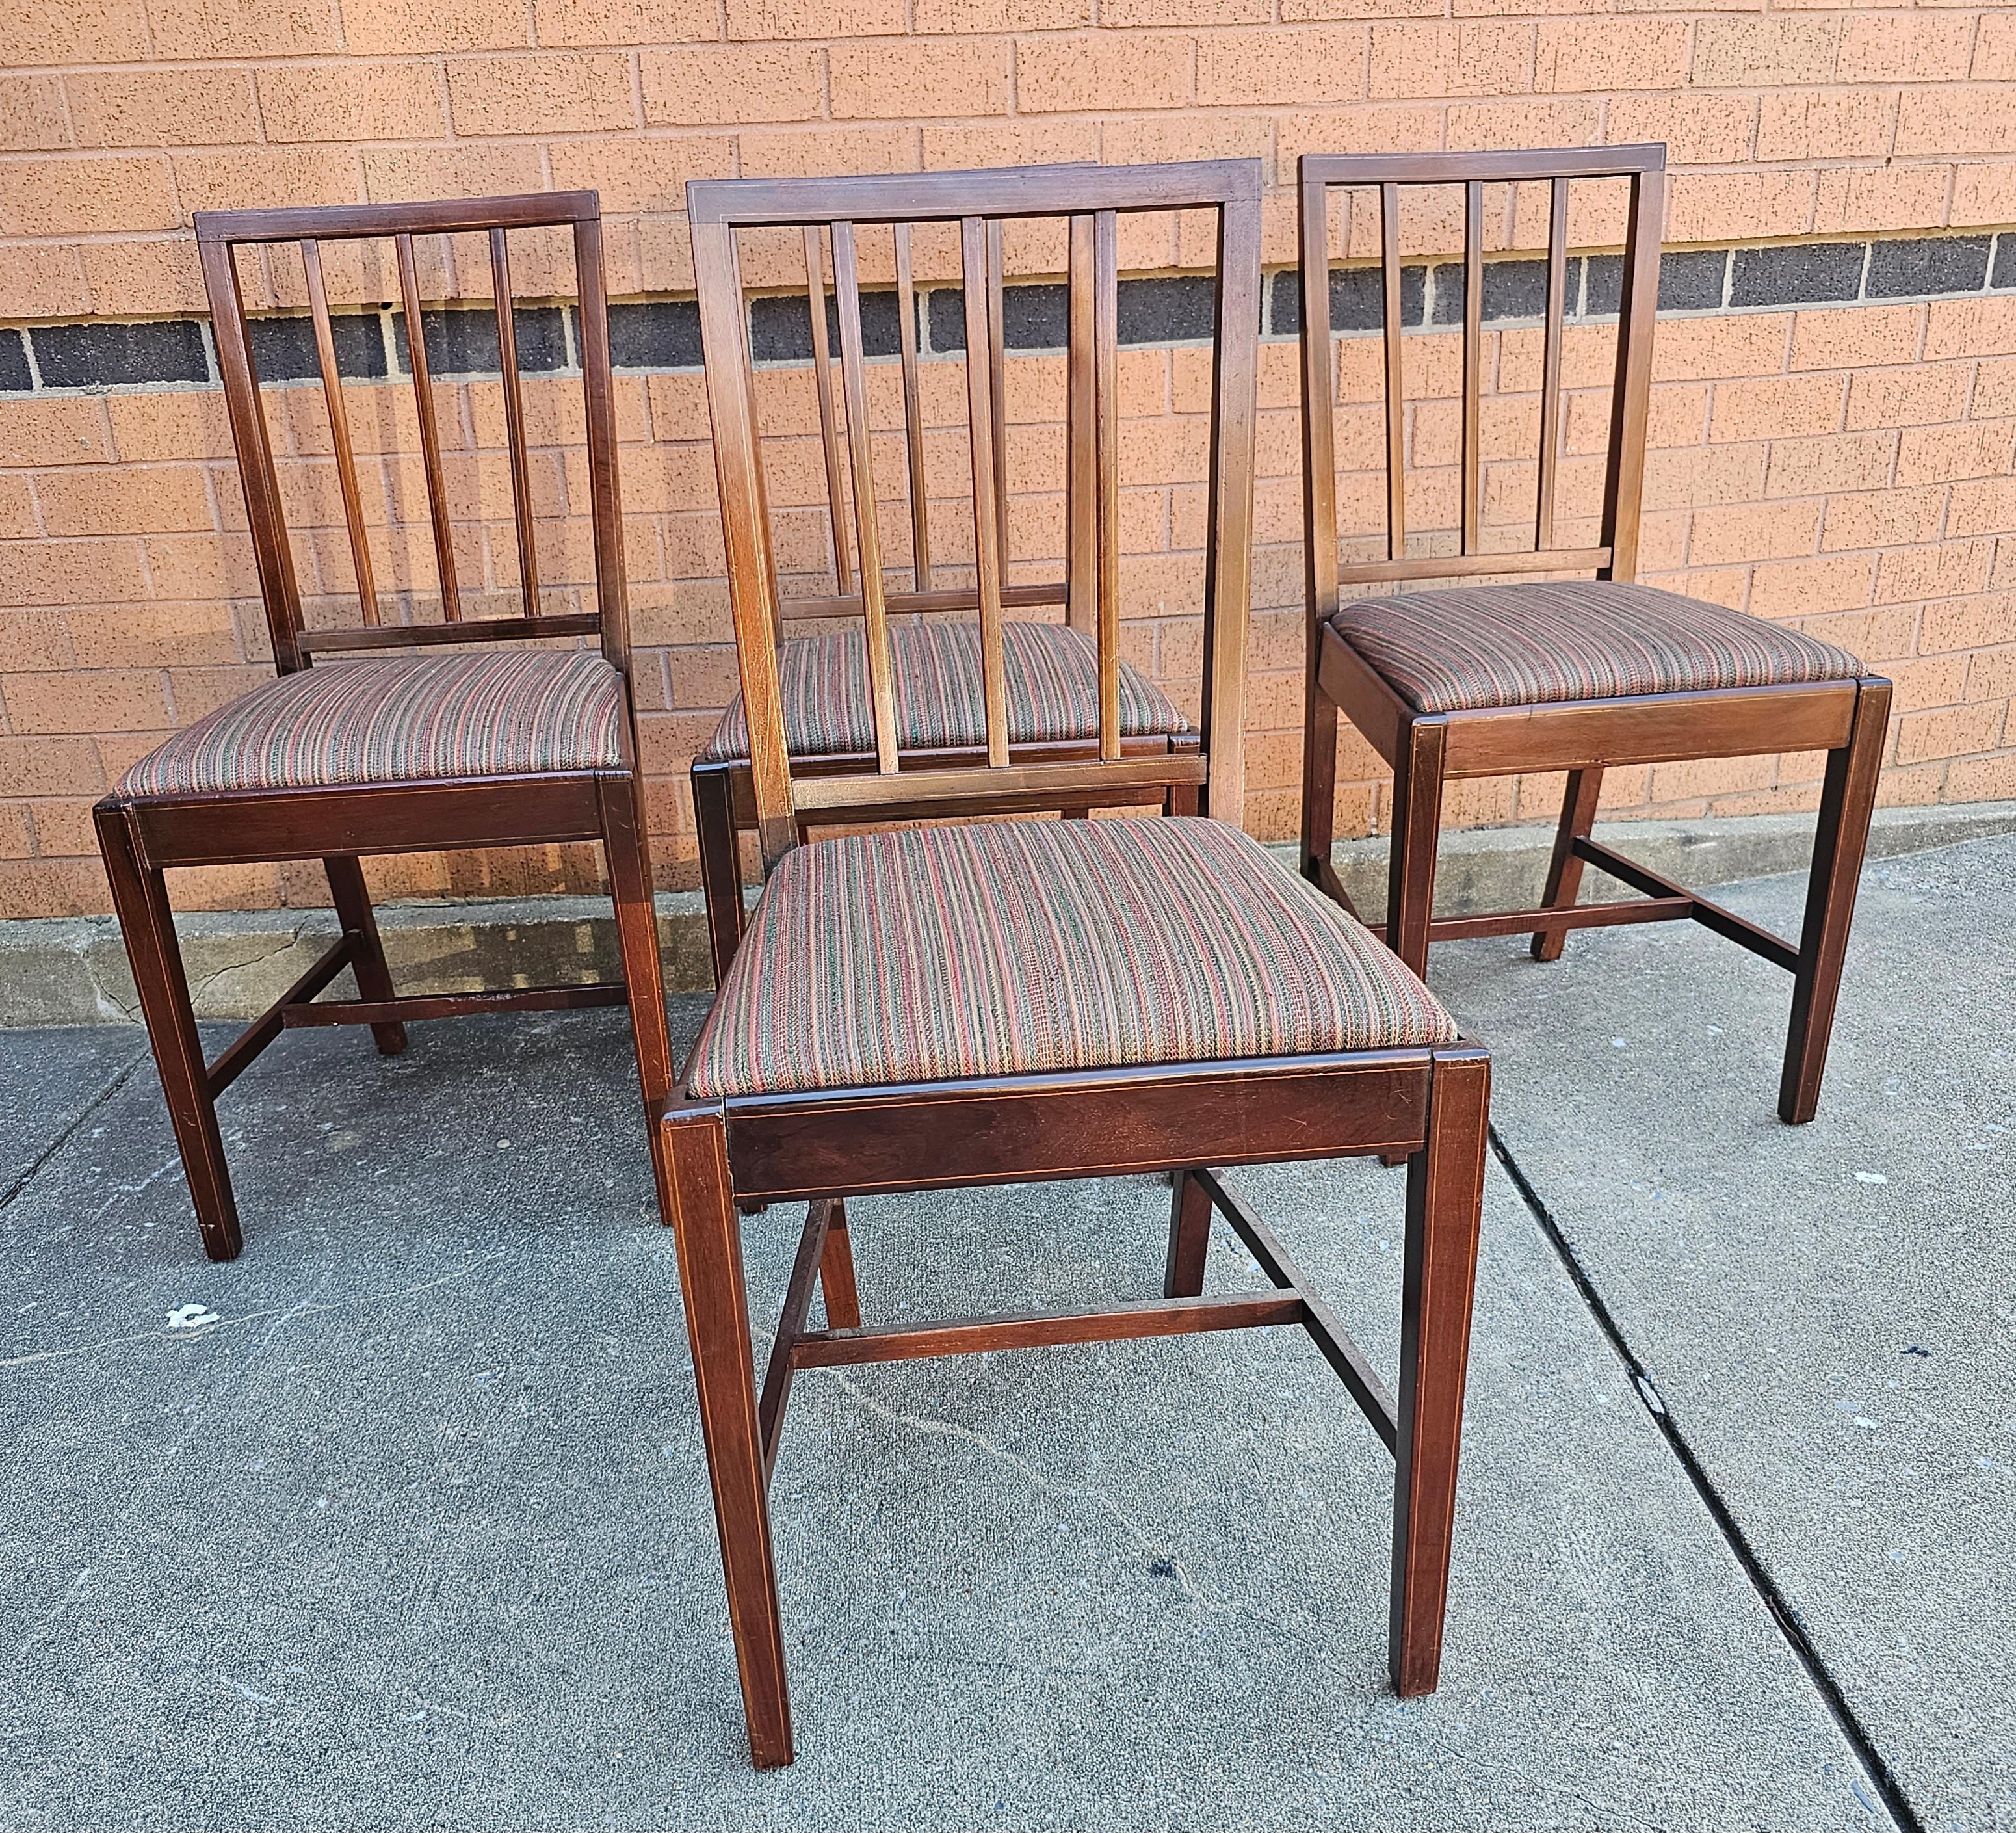 Early 20th Century Set of Four Federal Style Satinwood Inlaid Mahogany upholstered seat Side Chairs. Chairs appear to have been refinished down the road. Measure 18